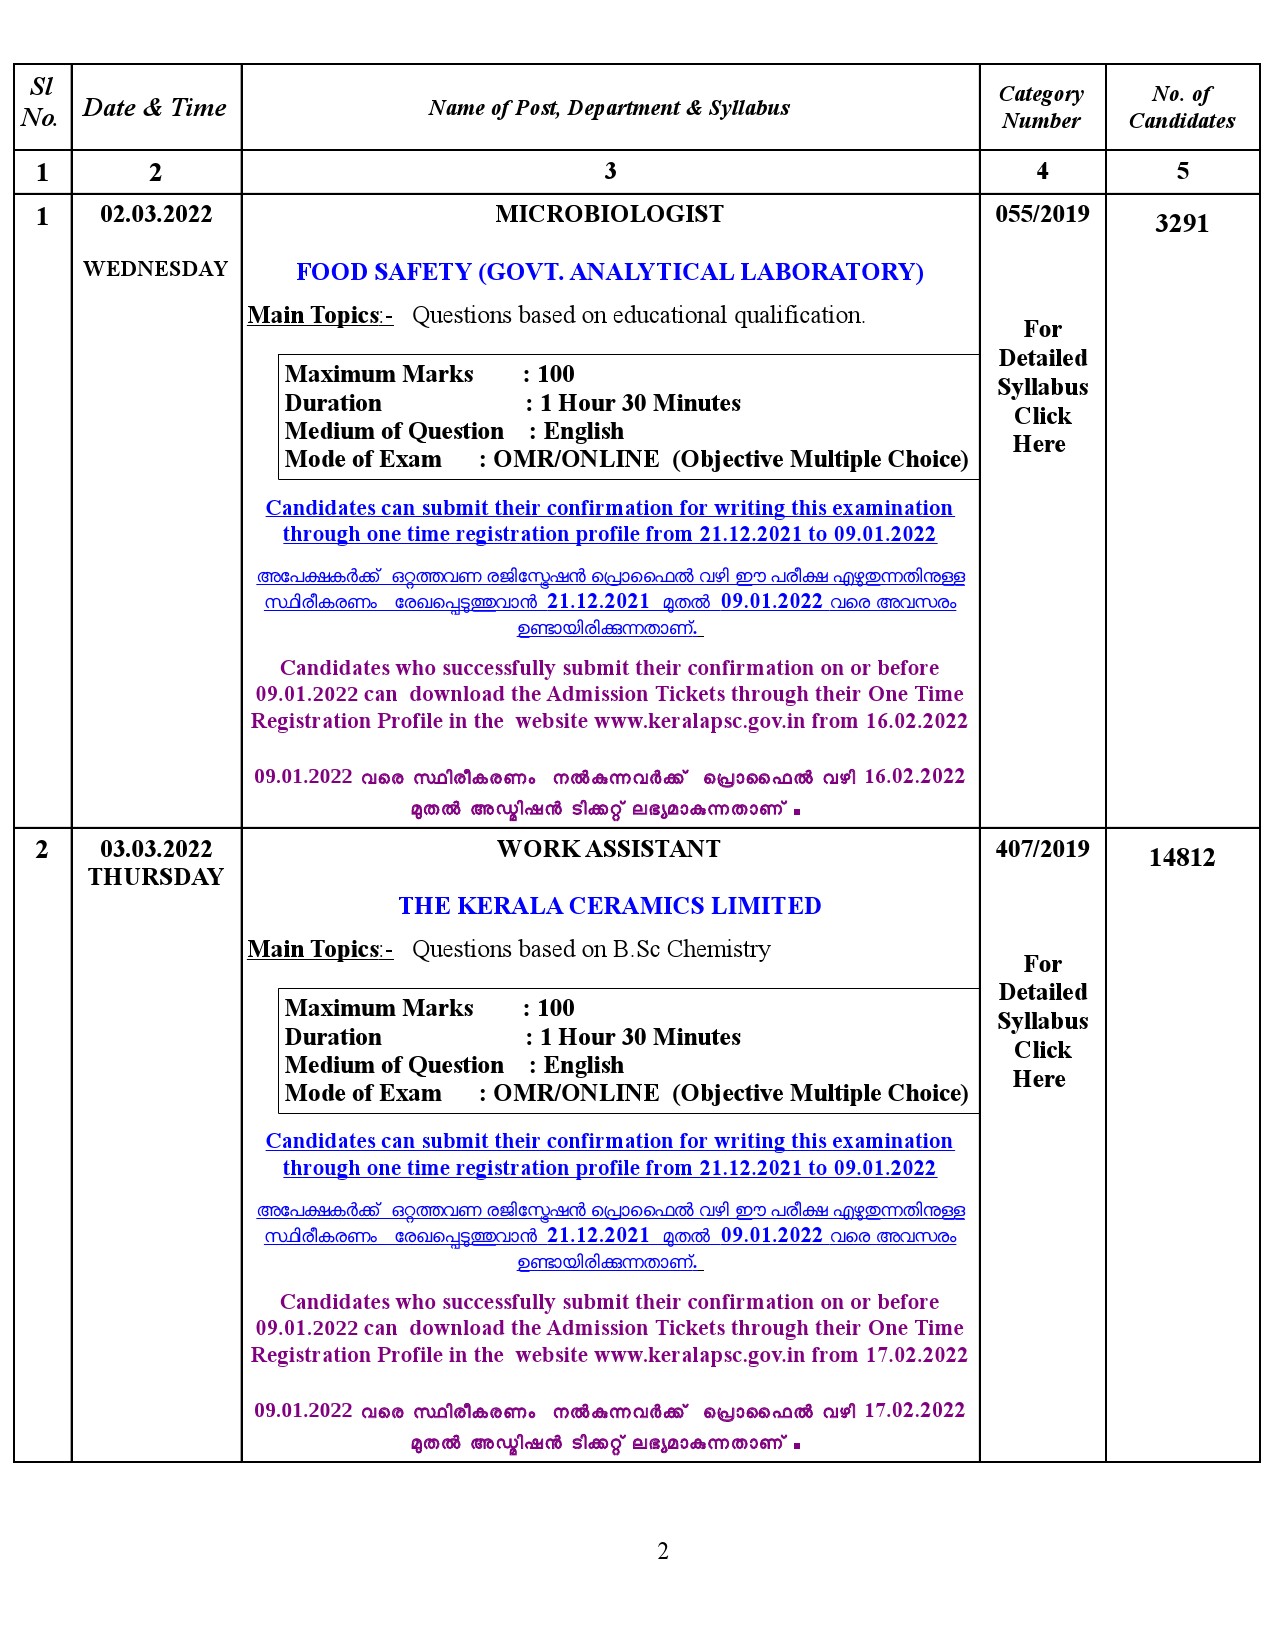 KPSC EXAMINATION PROGRAMME FOR THE MONTH OF MARCH 2022 - Notification Image 2